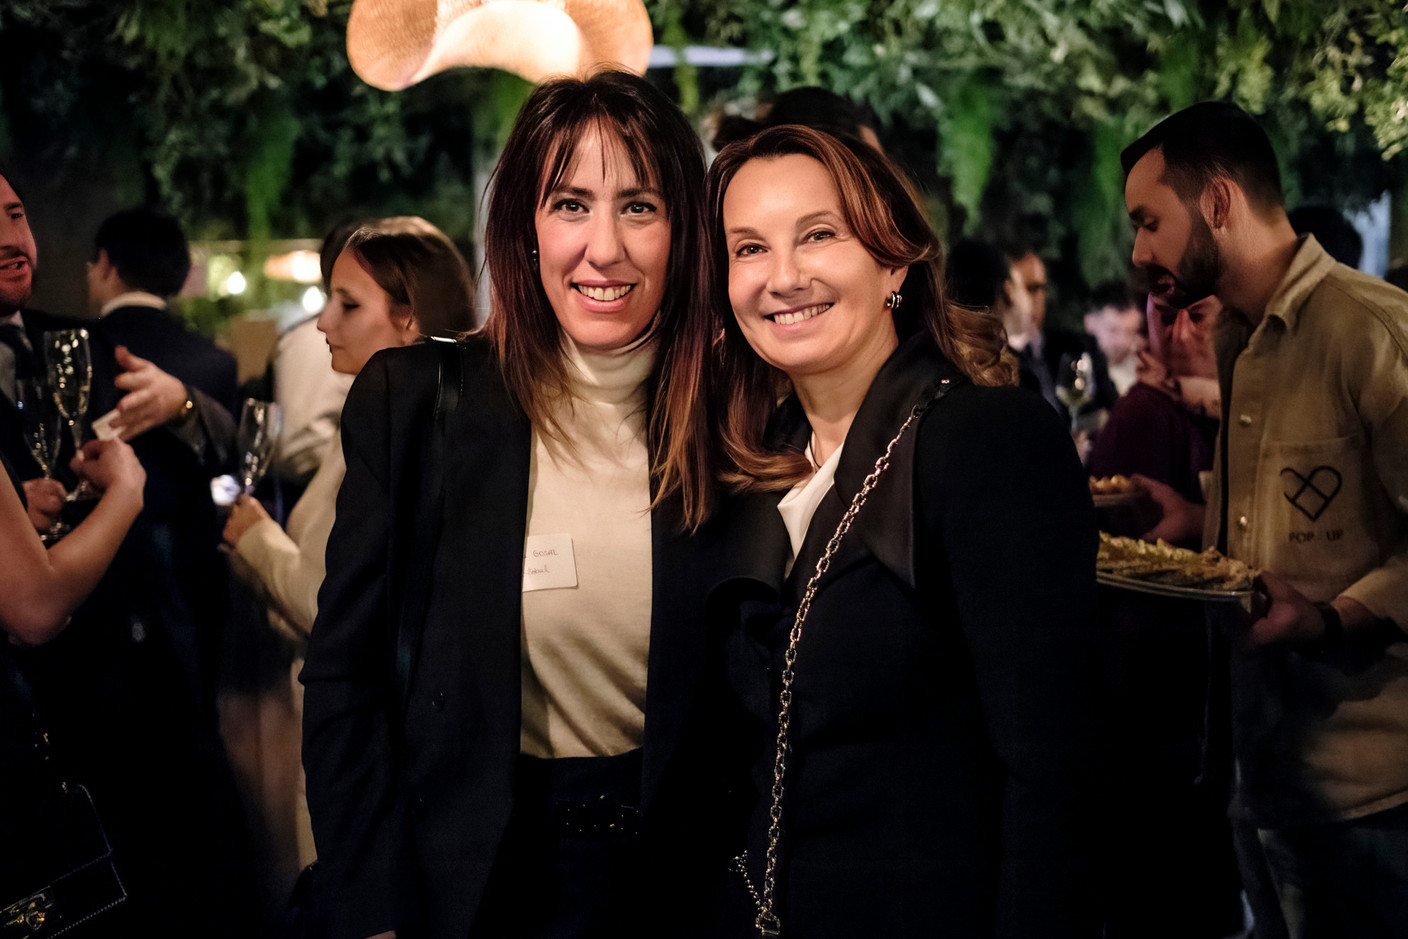 Sabrina Gosal (Sglobal) and Fabienne Riva (Patrimundi) at the Luxembourg Association of Family Offices (LAFO) winter 2023 cocktail, which took place on 8 February 2023 at Hertz PopUp. Photo: Jan Hanrion for LAFO